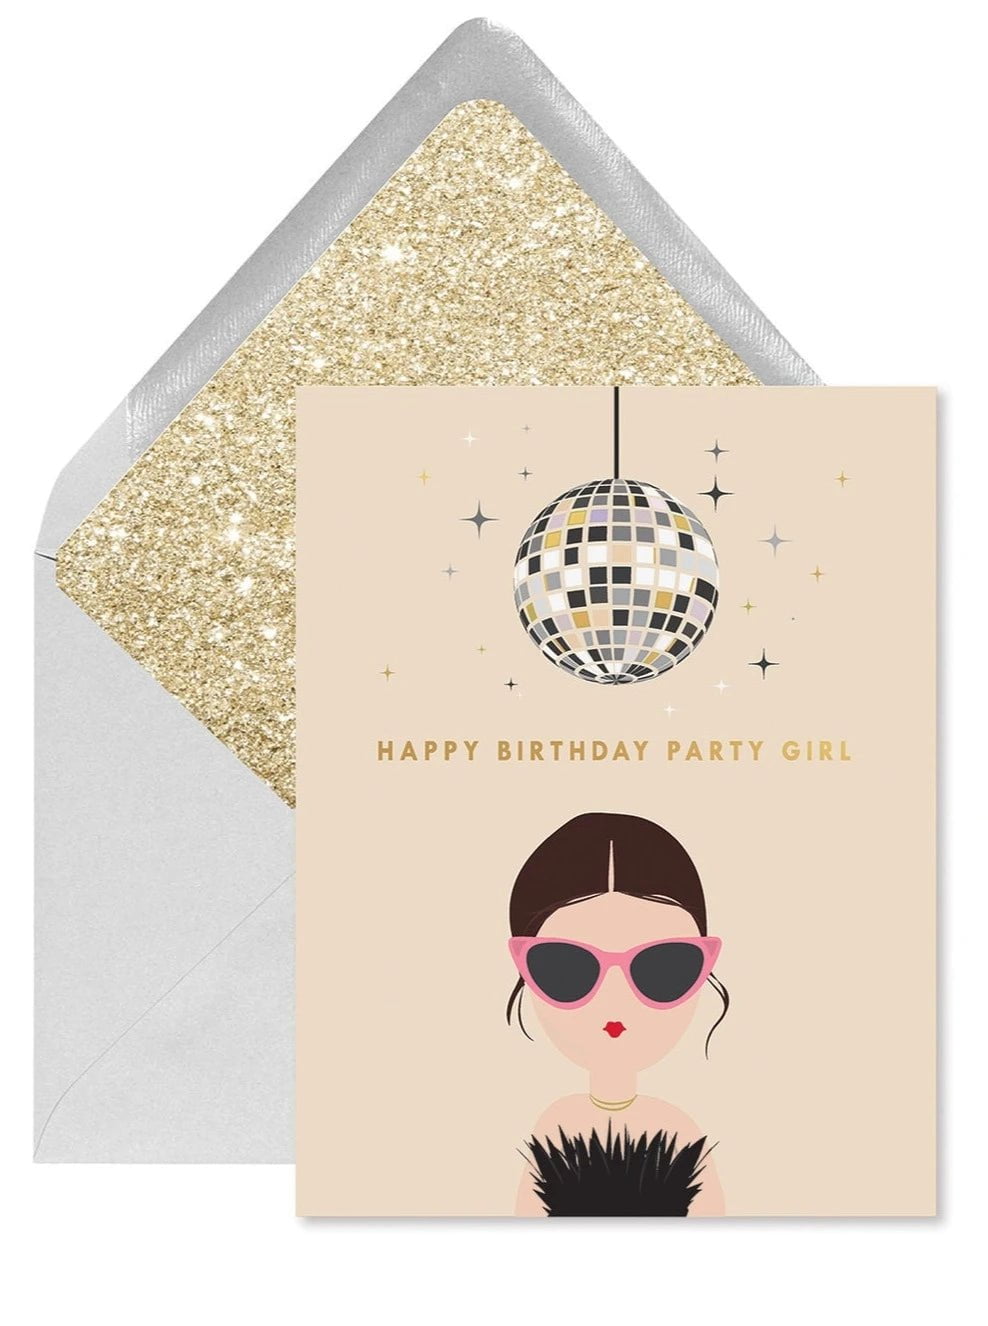 Ginger P. Designs Stationary Disco Party Girl Birthday Greeting Card